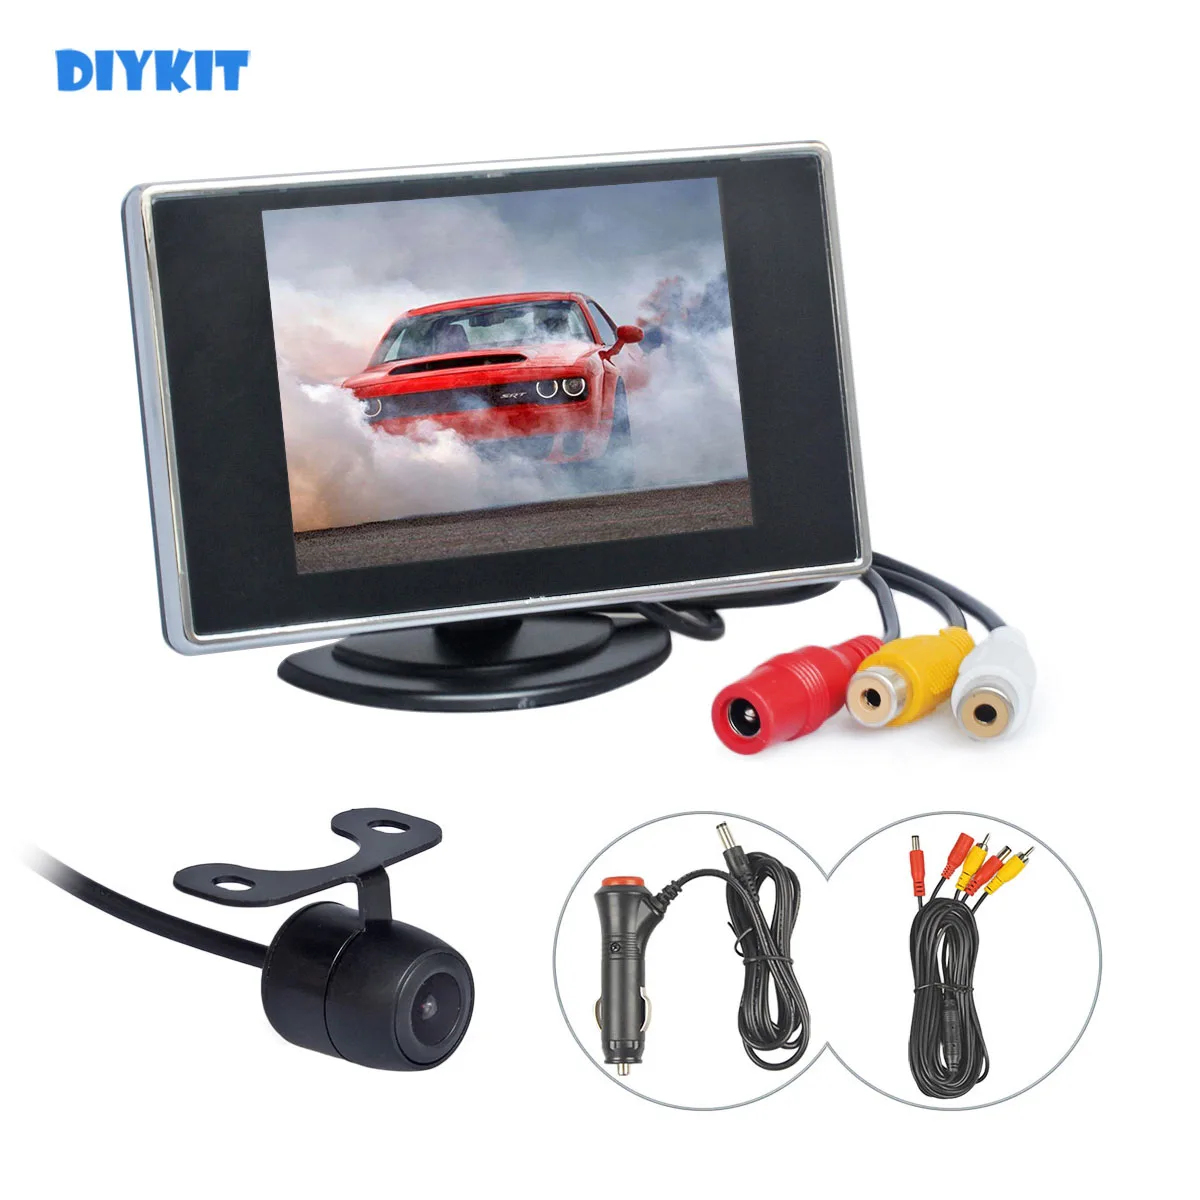 DIYKIT Wired 3.5" TFT LCD Car Monitor Backup Rear View Car Camera Kit Reversing Camera Parking Assistance System Easy Connect